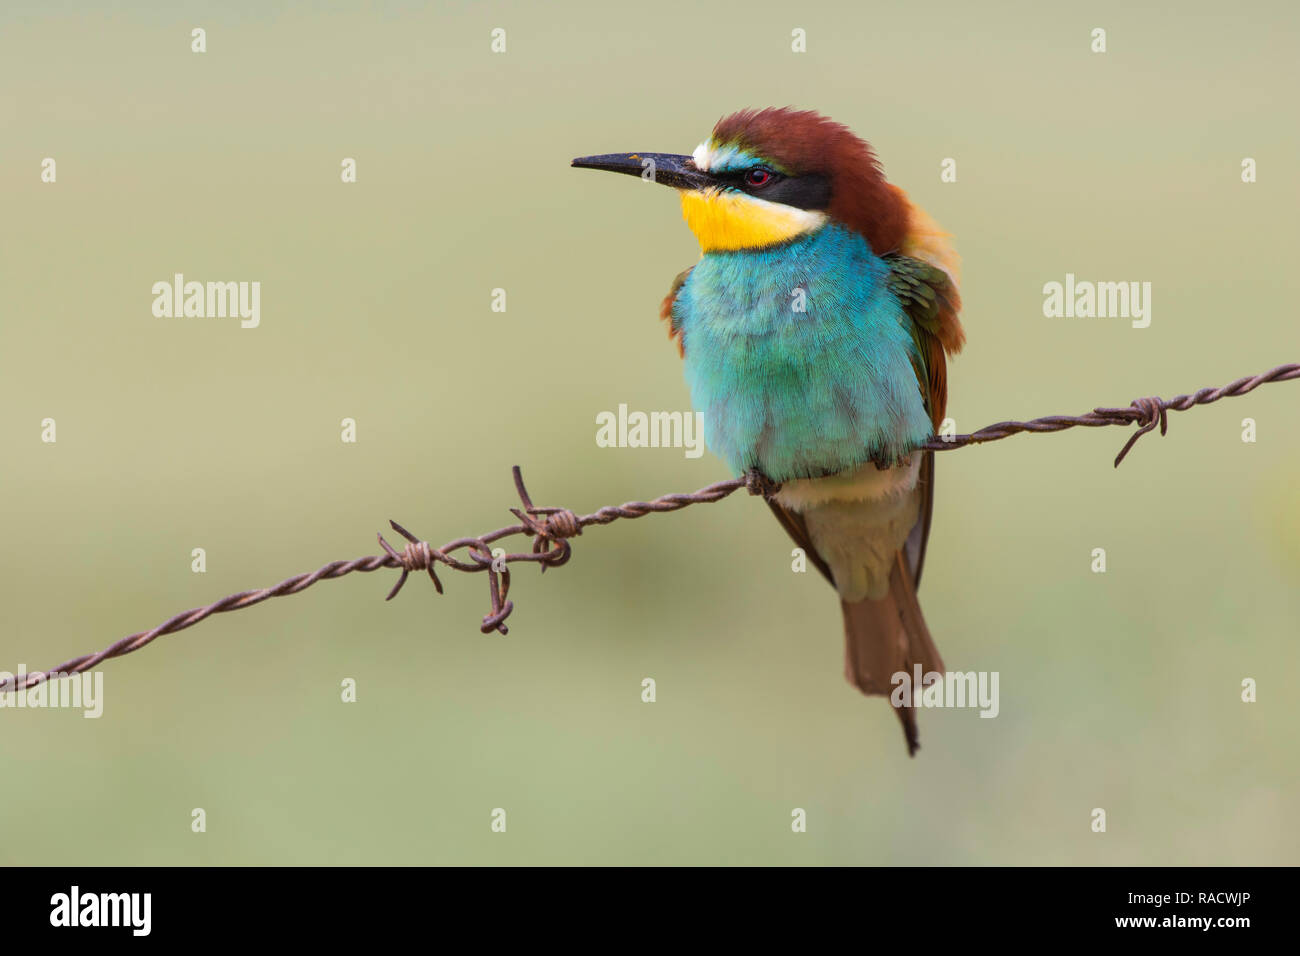 Eater European or common -eater ( Merops apiaster ) perched on his perch Stock Photo